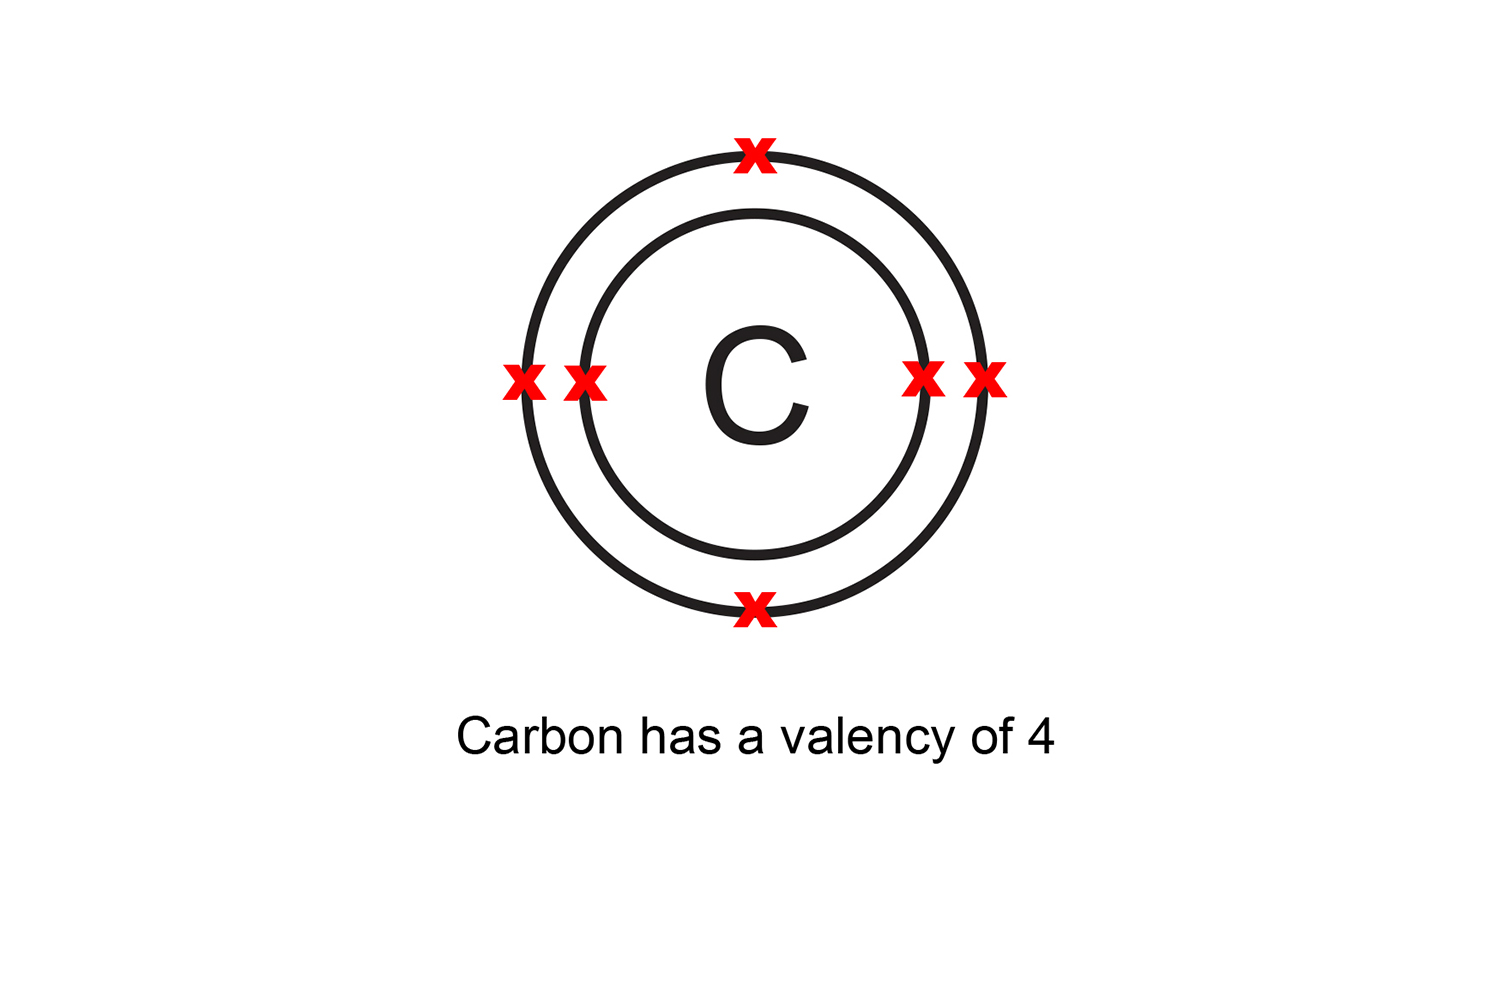 Carbon has a valency of 4 as it has 4 electrons in its outer shell